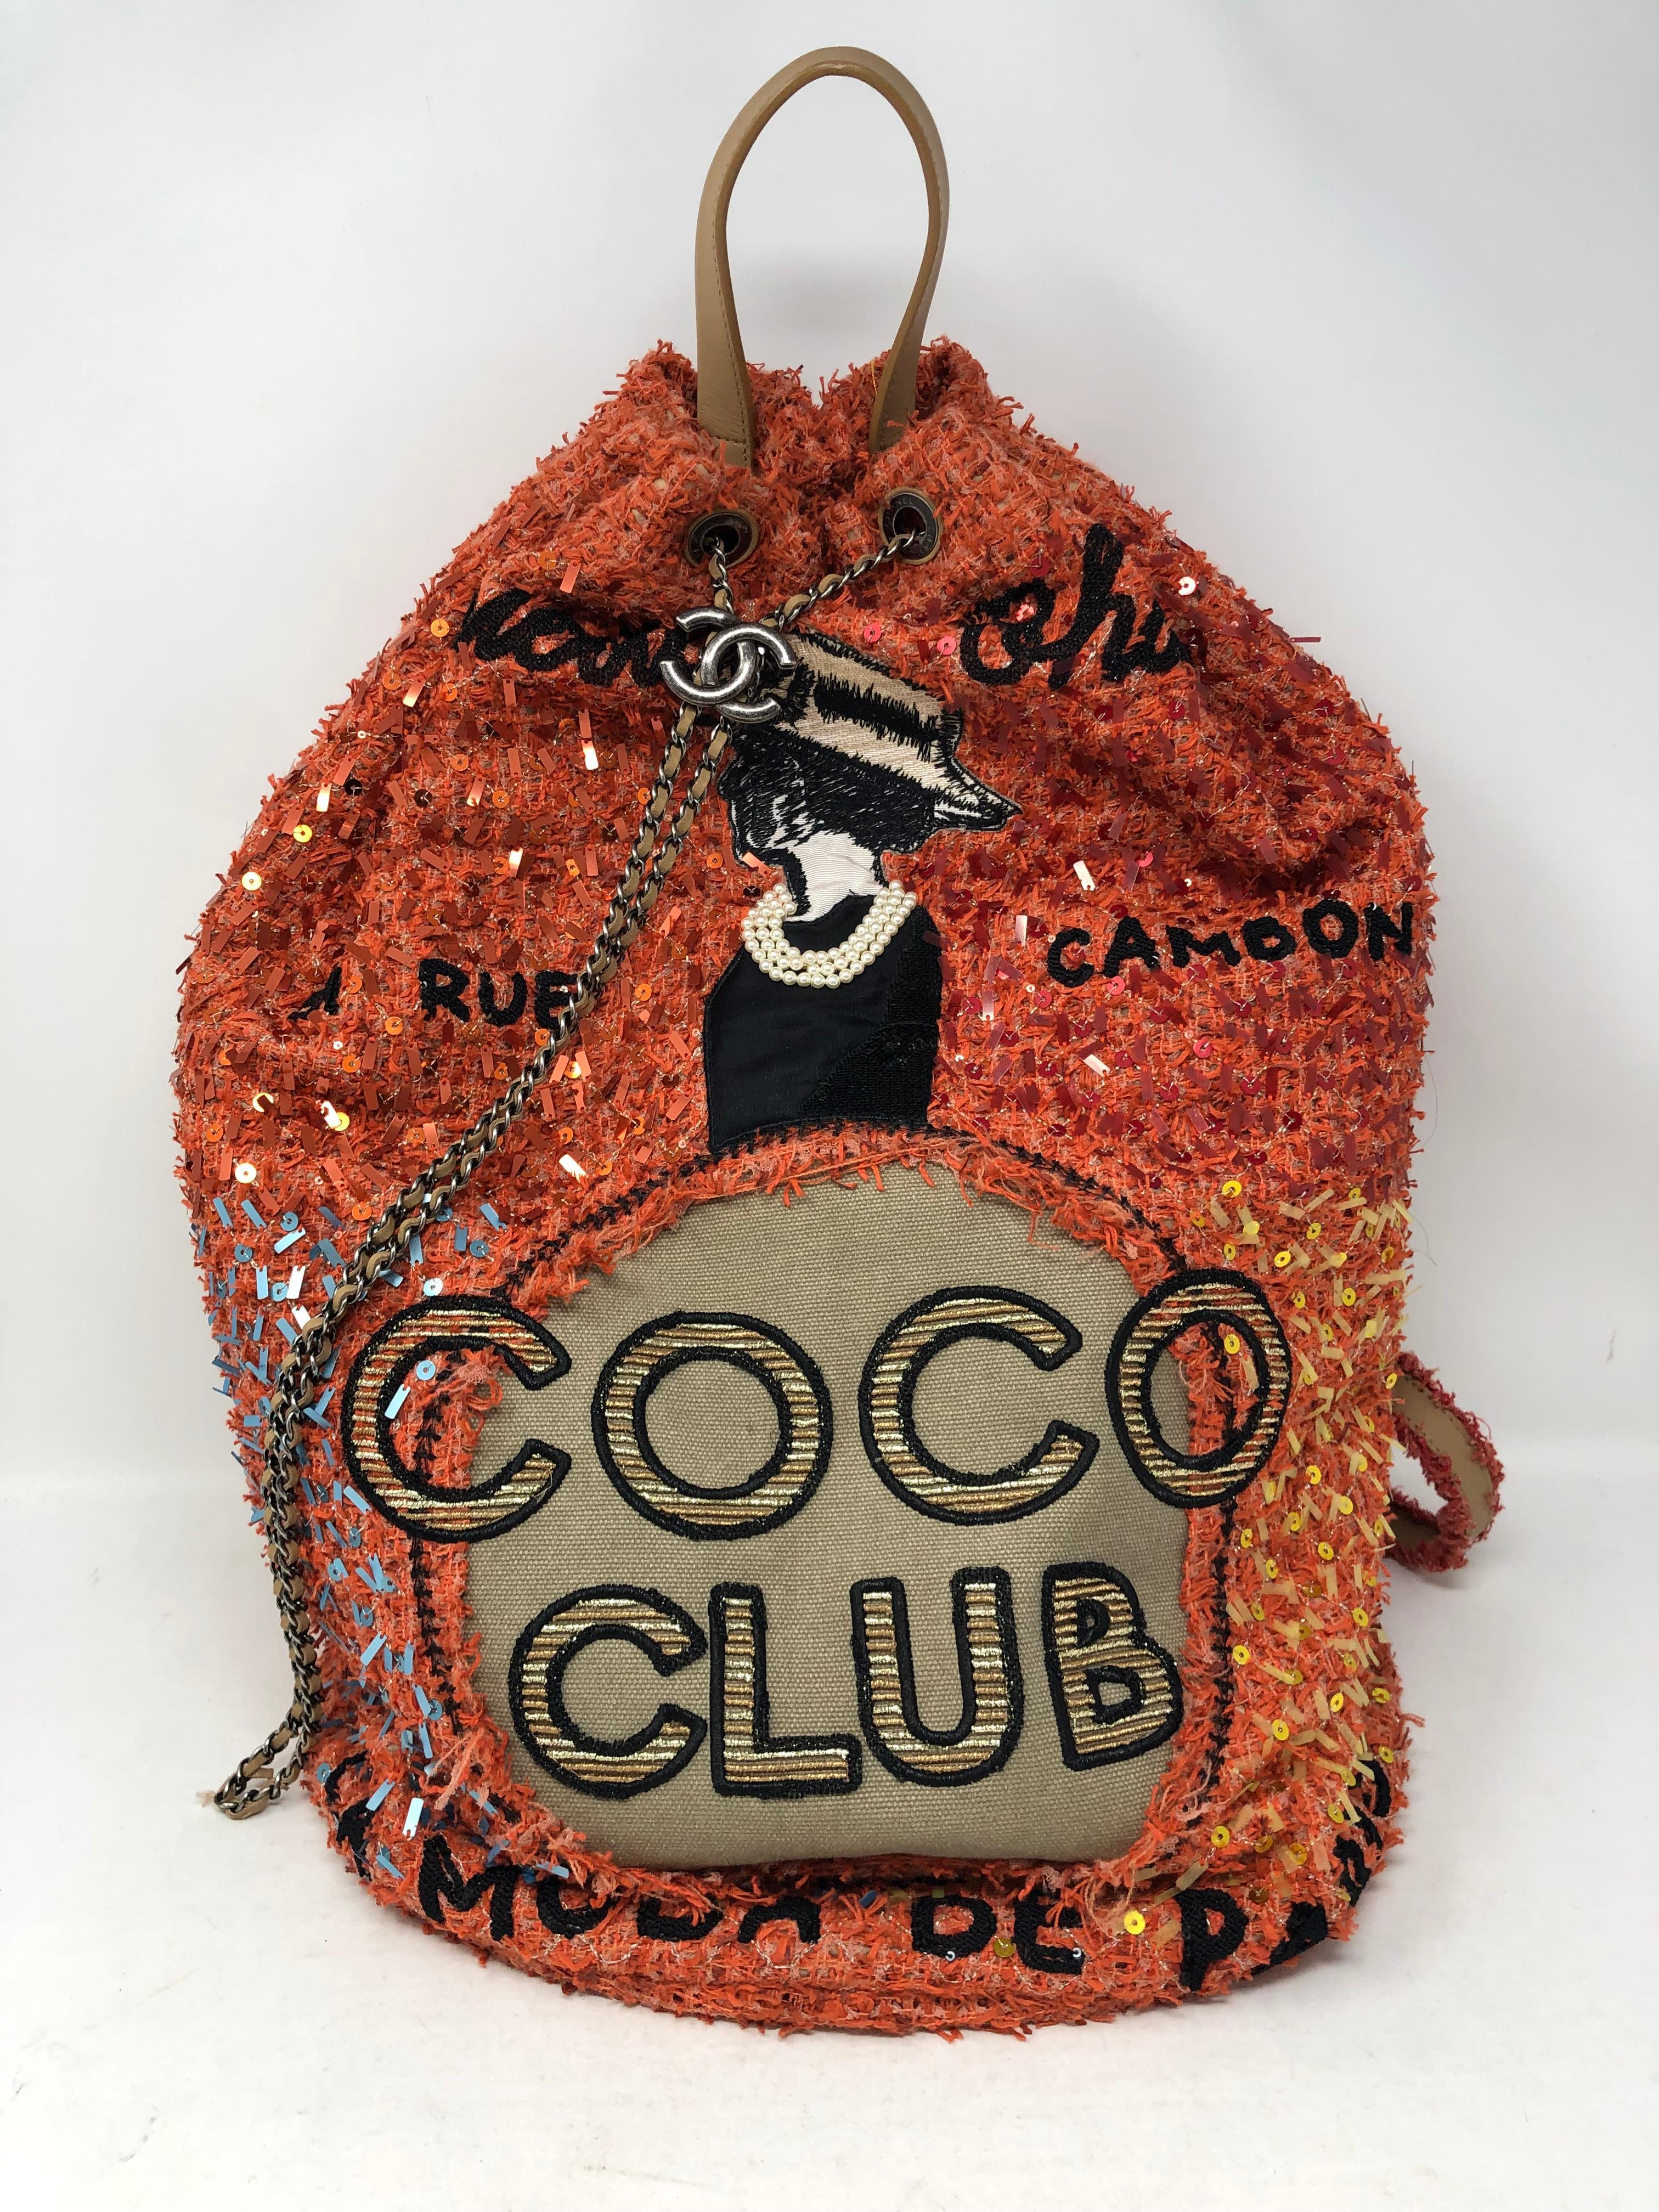 Chanel Tweed Sequins Embroidered Coco Club Backpack from 2017 Cuba Cruise Collection. This limited backpack features elements of Cuban culture. Rare one for your collection. Very roomy and a lighter bag. Great for travel or everyday. Good condition.